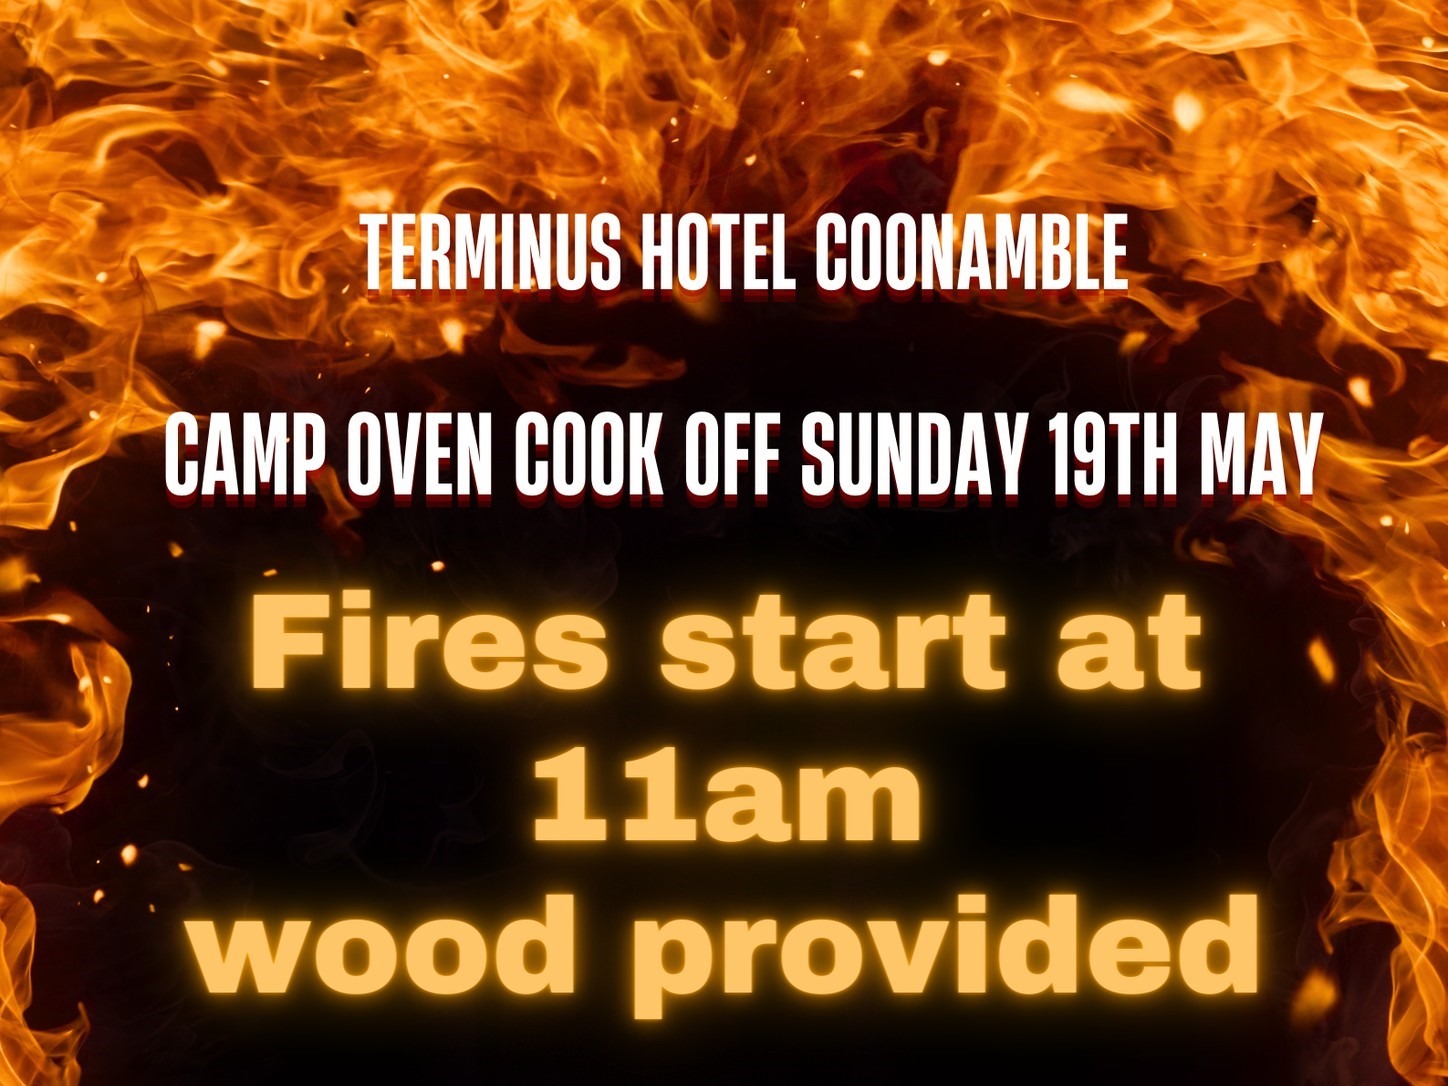 Camp Oven Cook Off at The Terminus Hotel